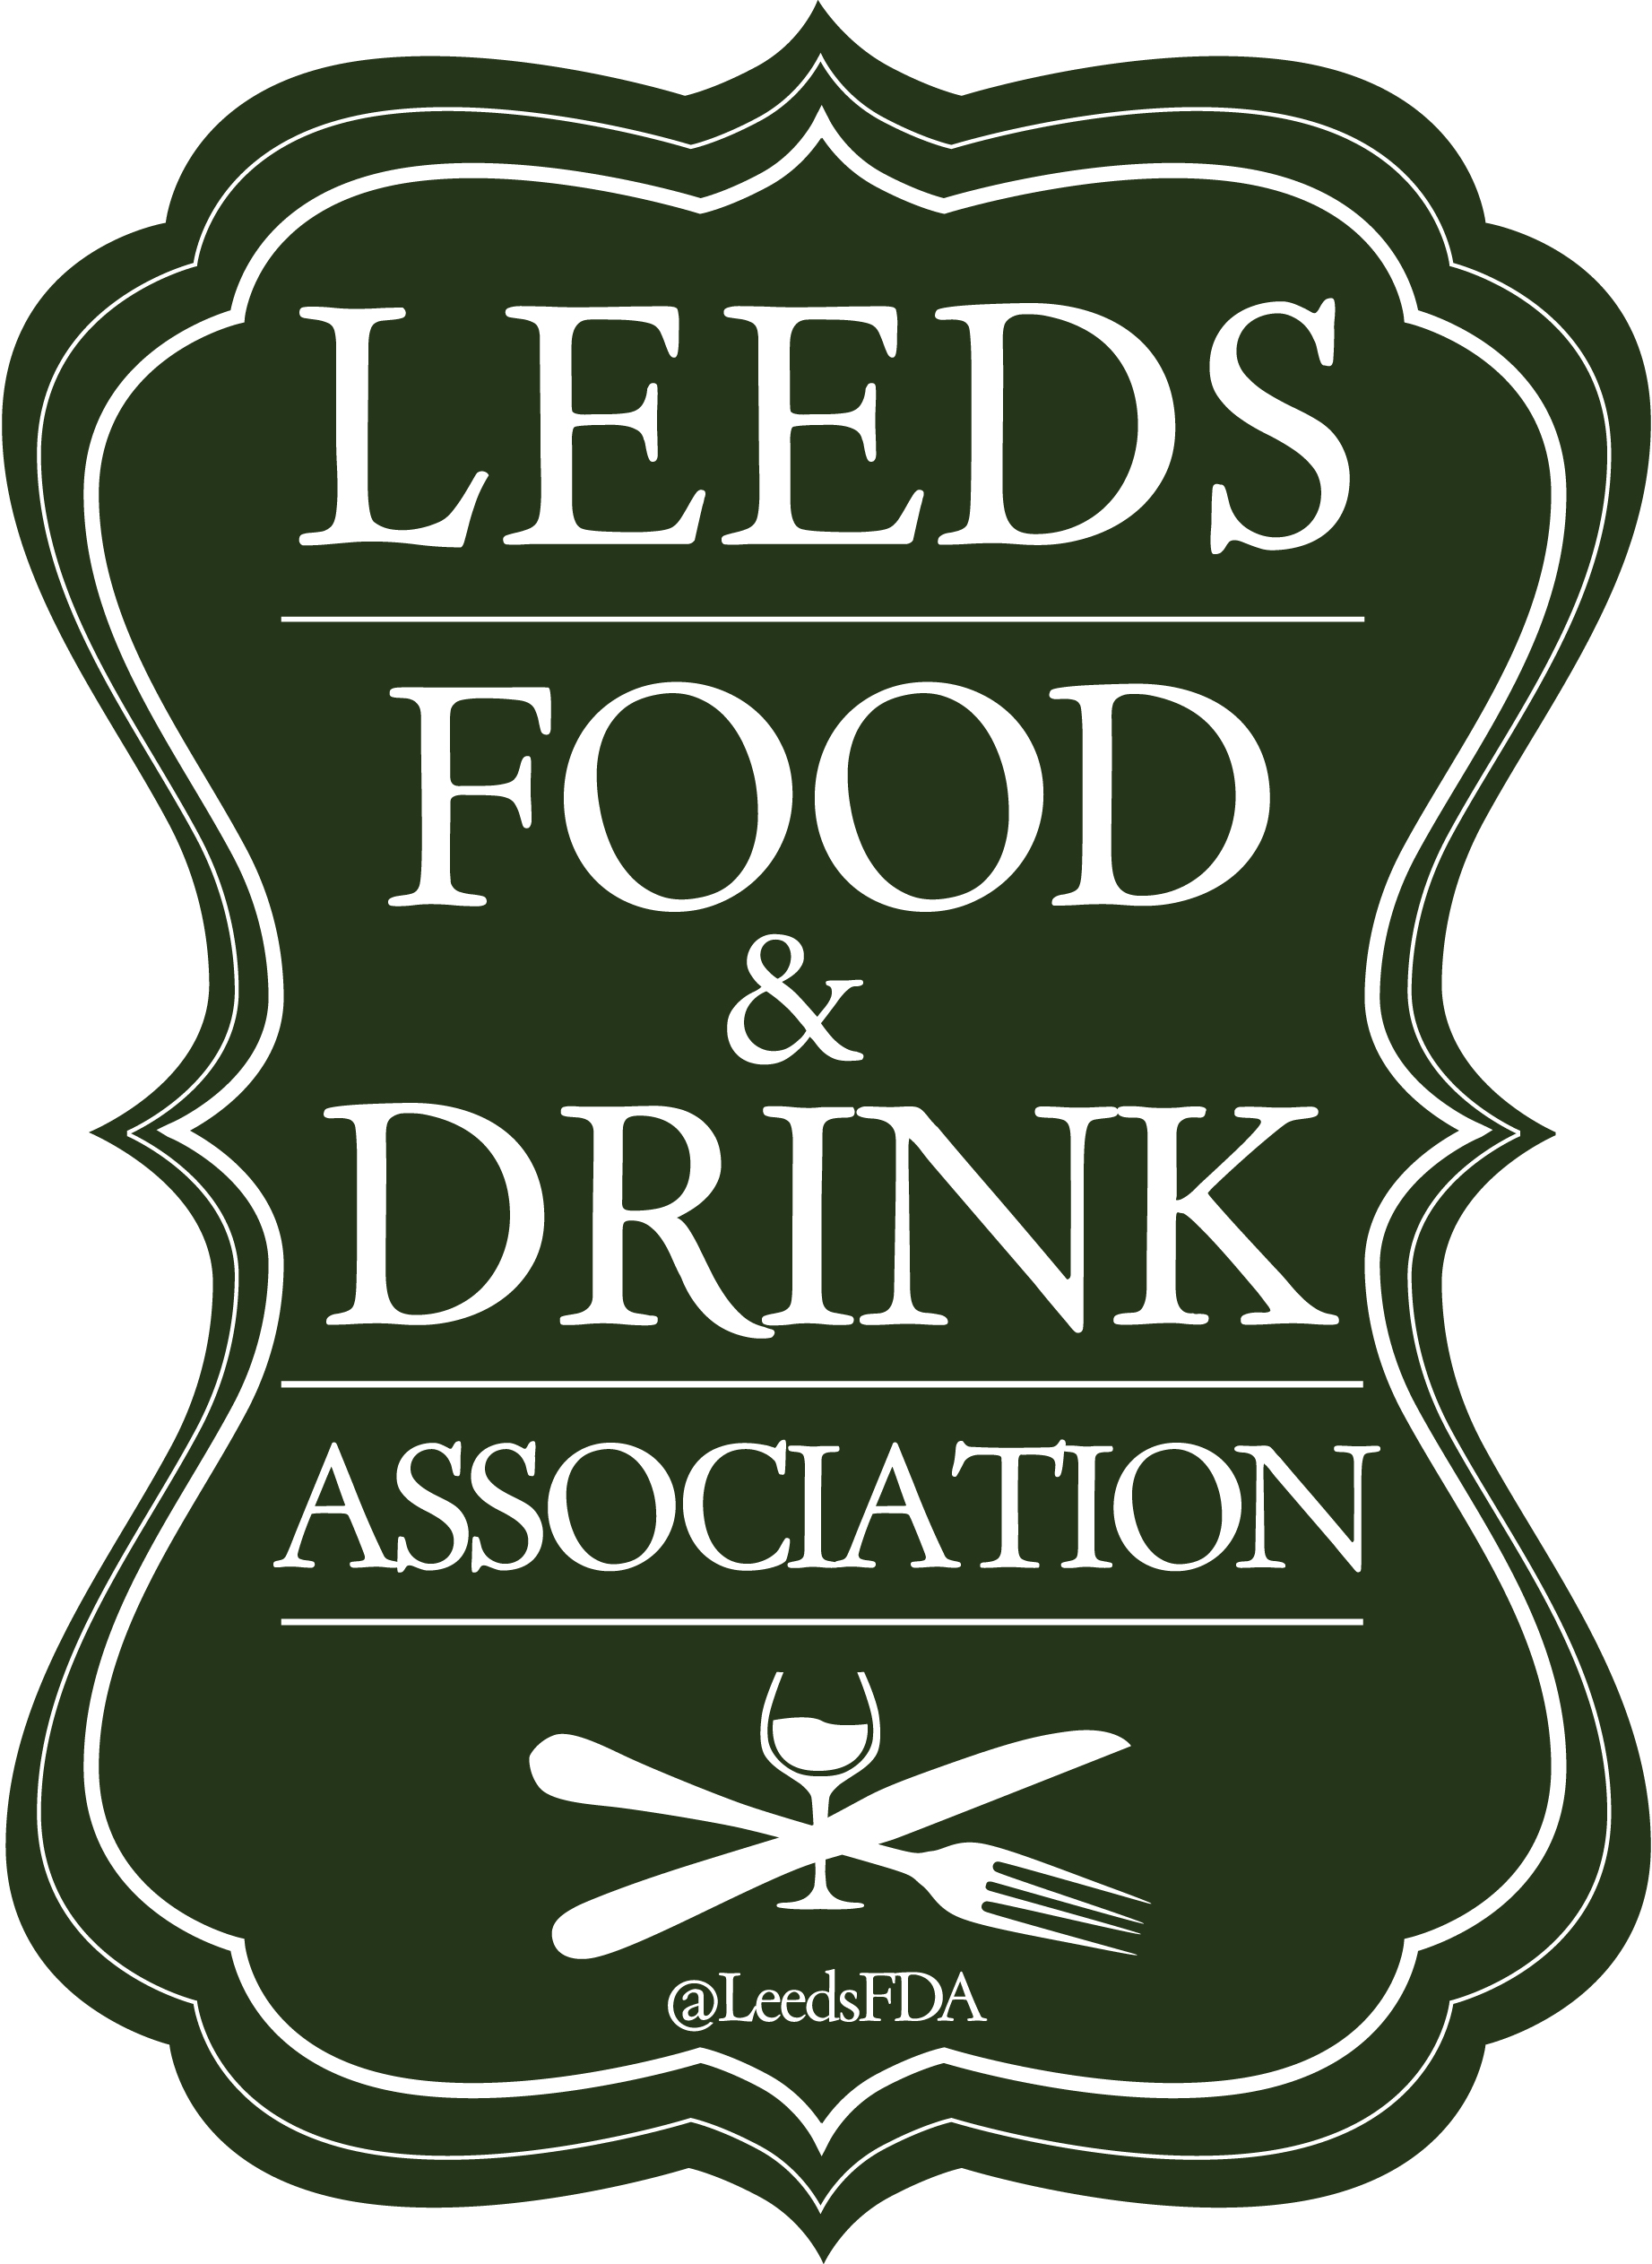 I'm proud to be a member of the Leeds Food and Drink Association